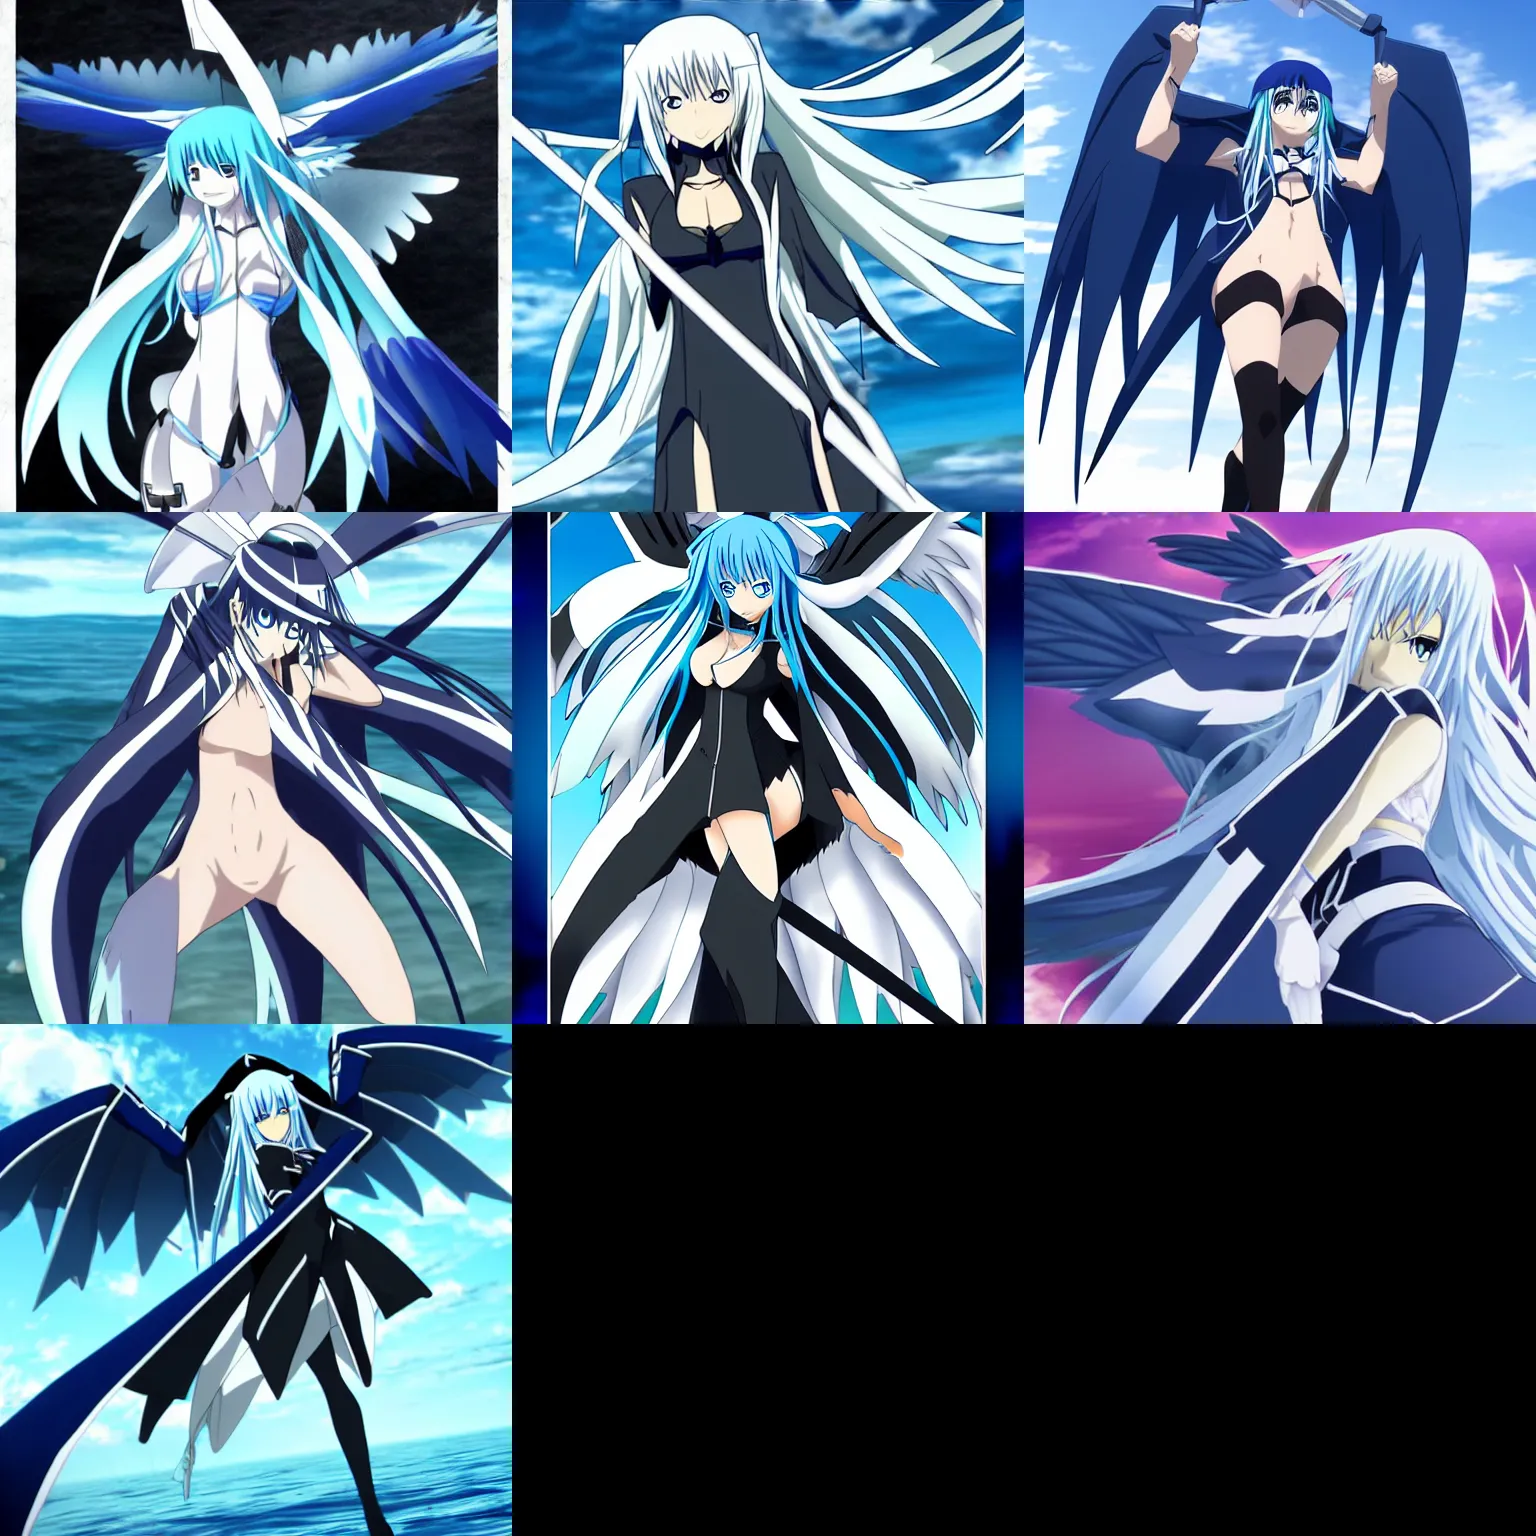 Prompt: esdeath from akame ga kill with seraphim wings flying over an ocean